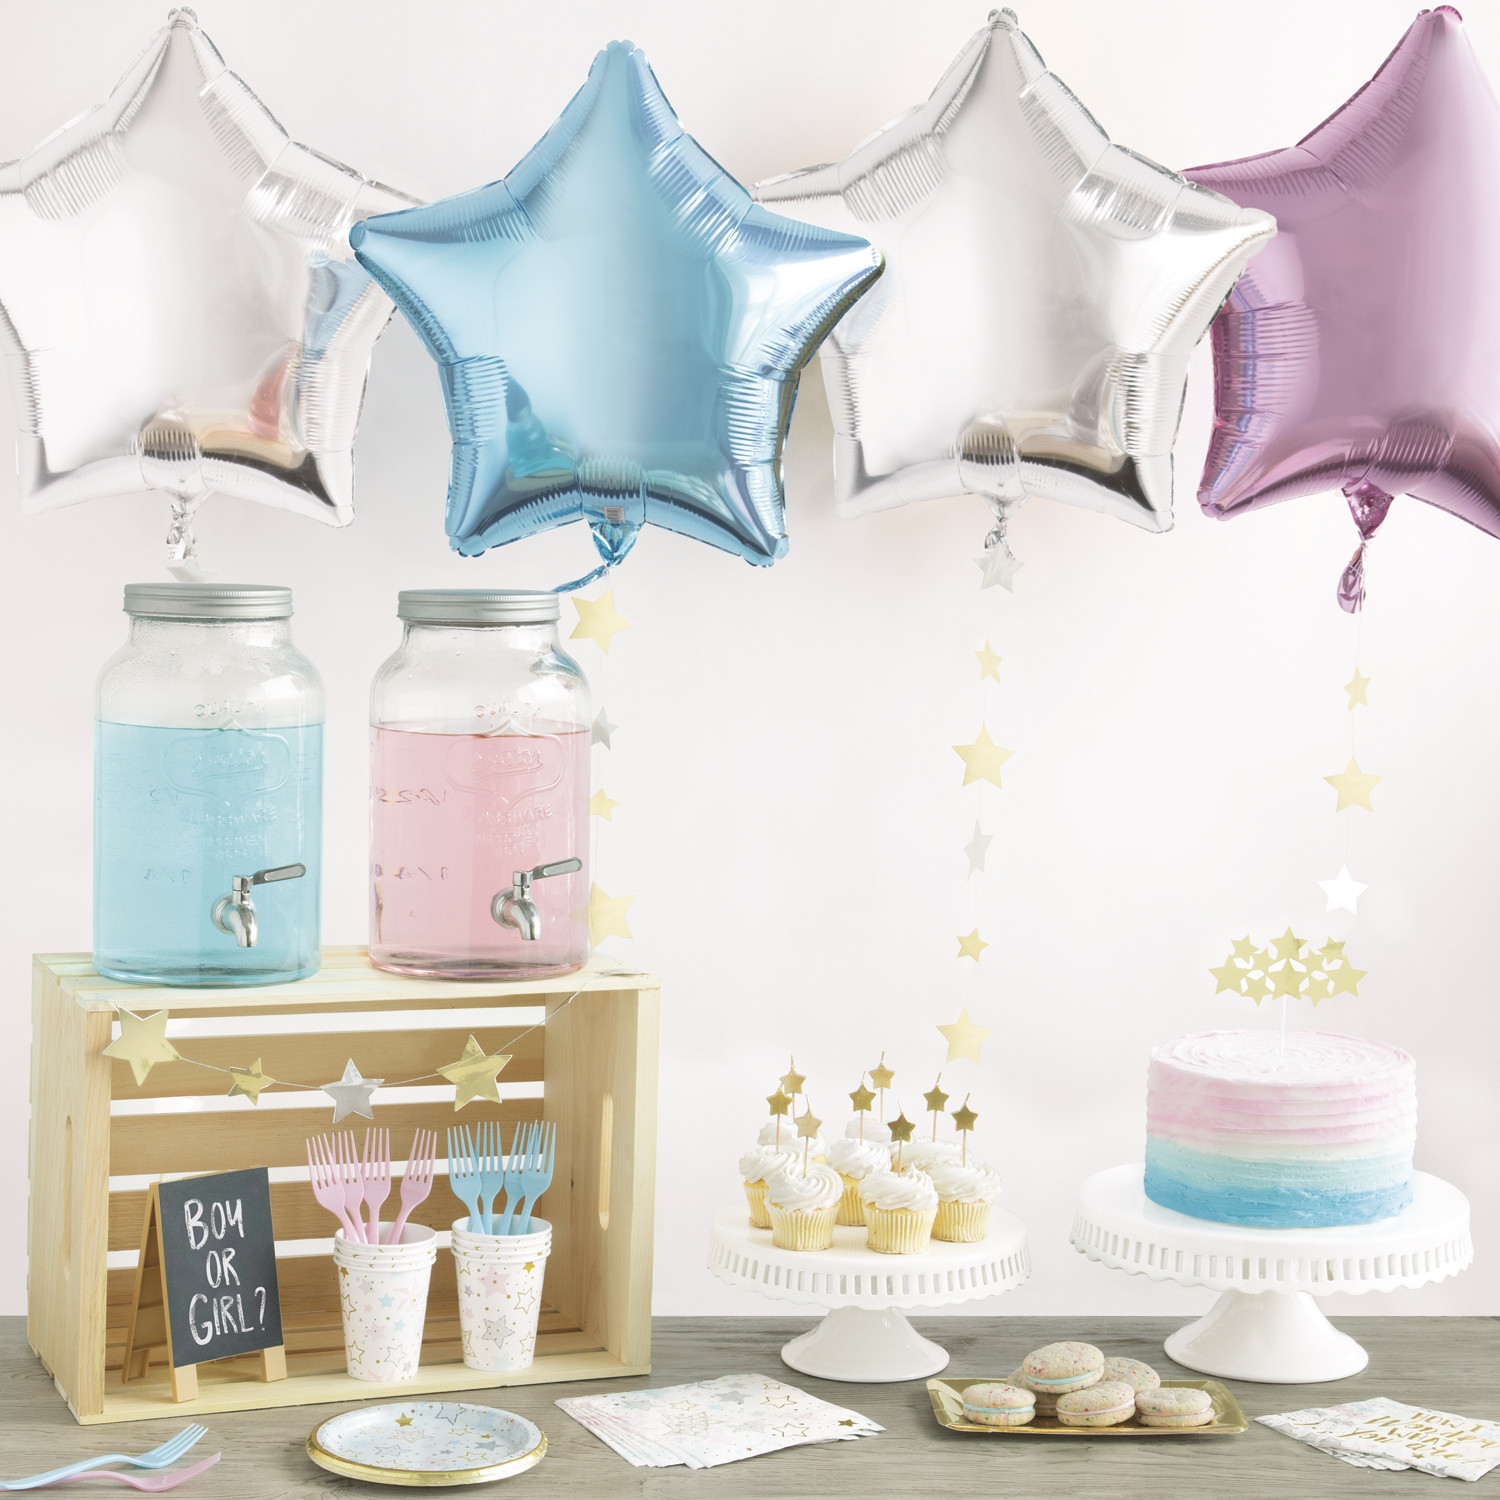 Cool Gender Reveal Party Ideas
 Gender Reveal Party Ideas